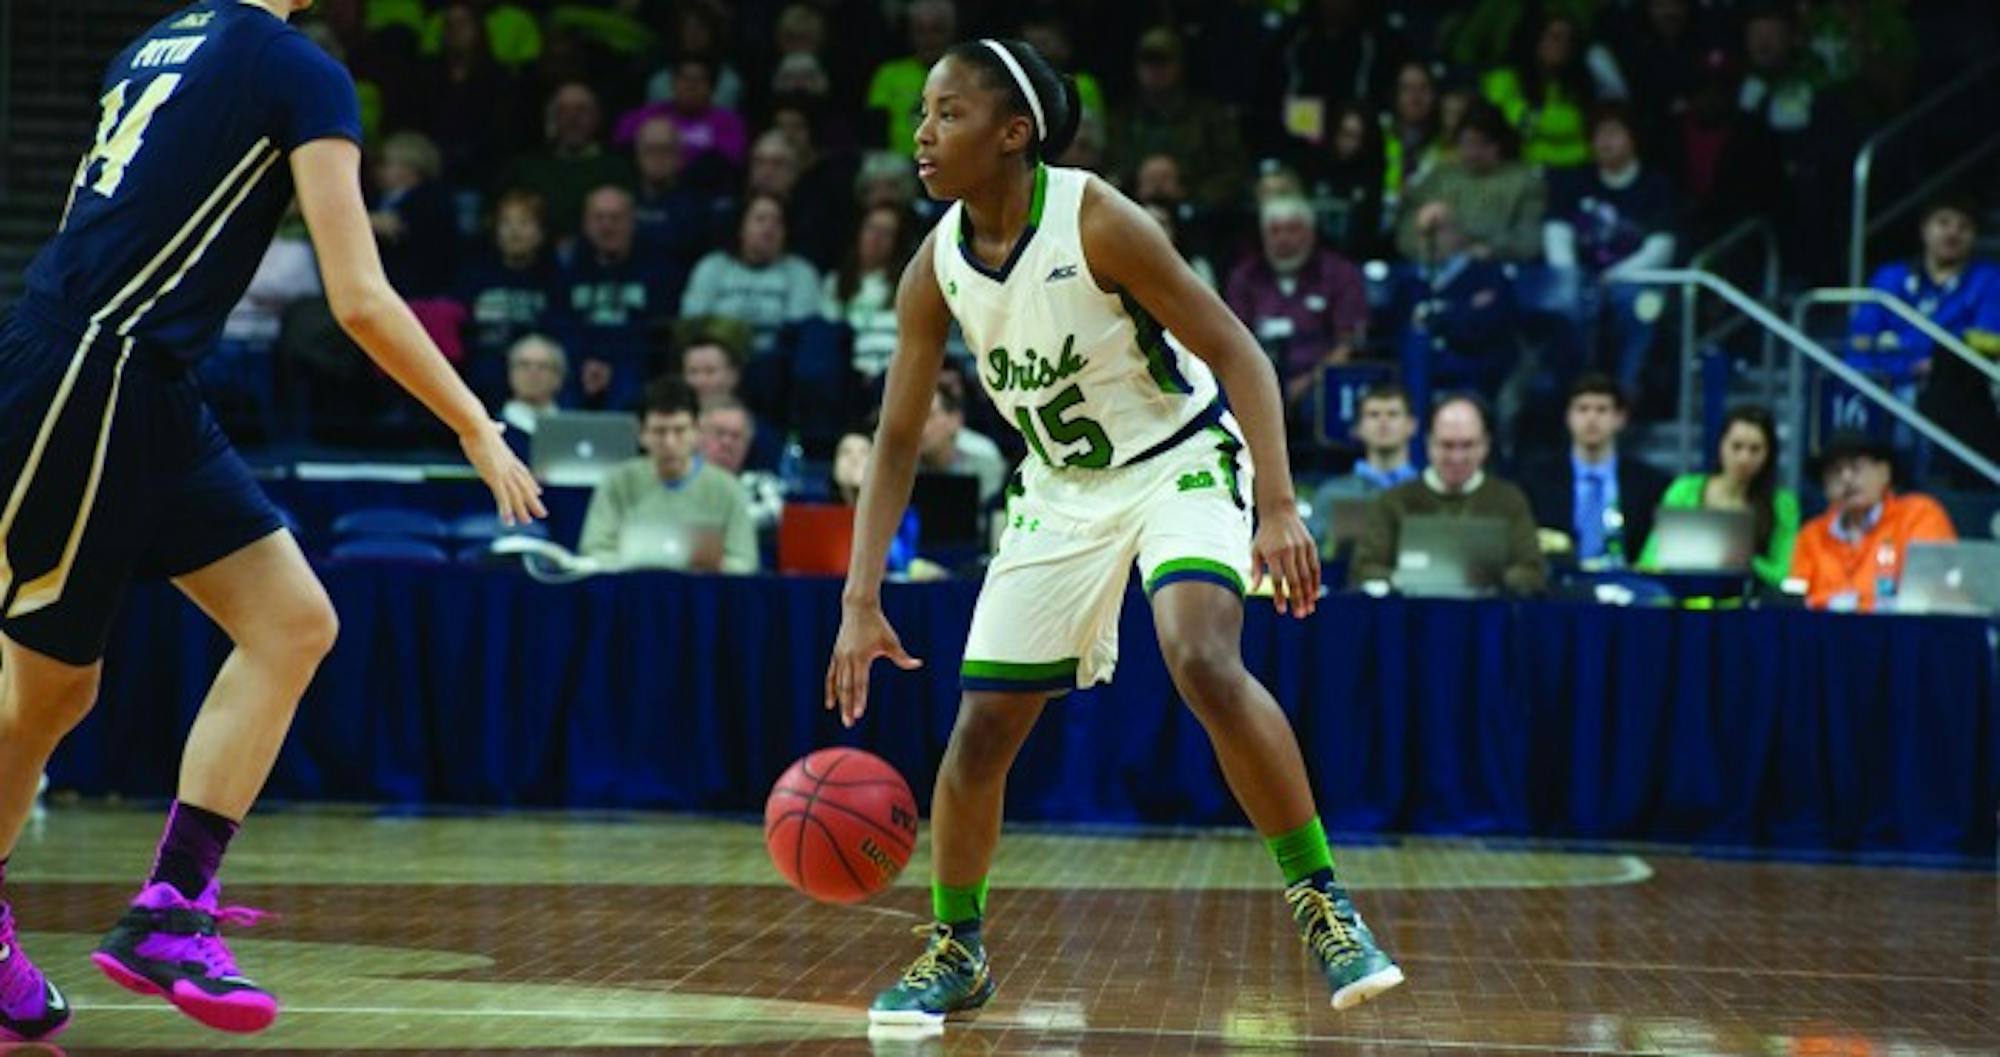 Irish sophomore guard Lindsay Allen surveys the court during Notre Dame's win over Pittsburgh on Feb. 23.